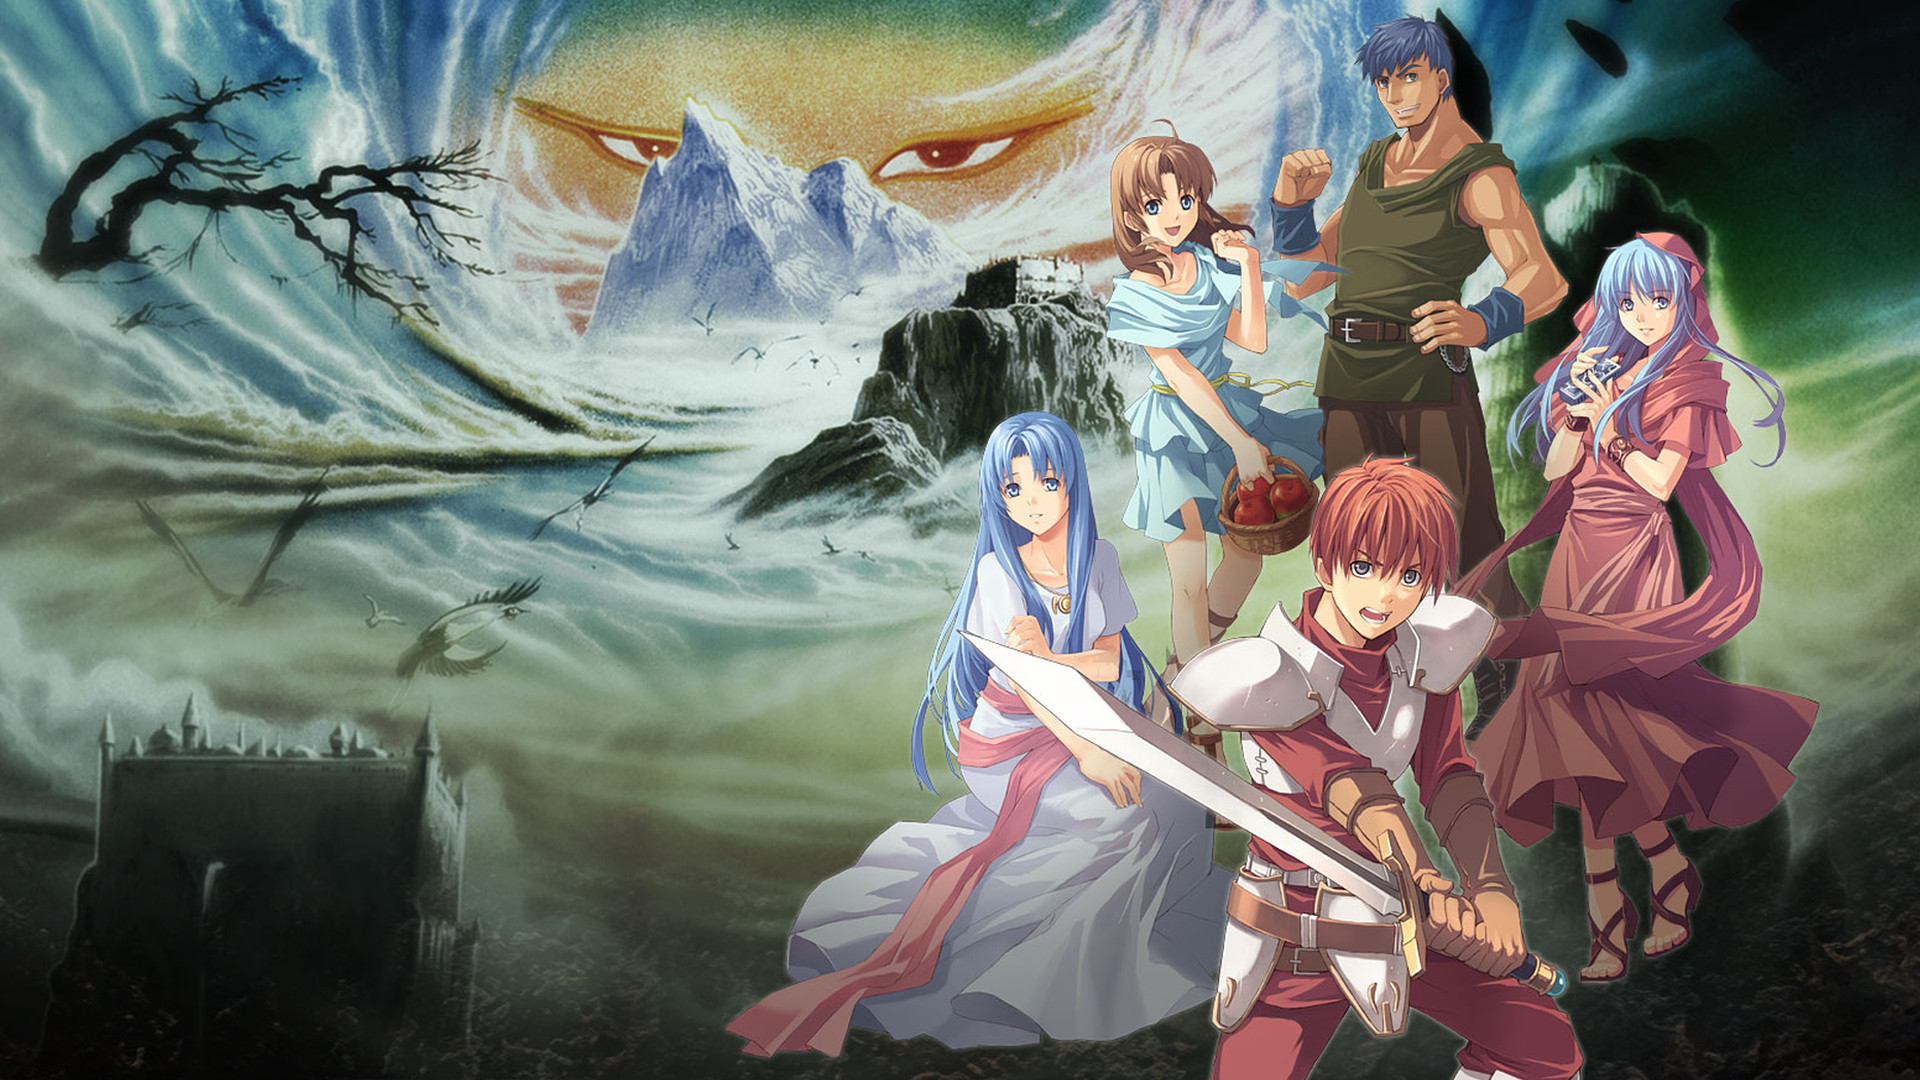 Video Game Ys II: Ancient Ys Vanished The Final Chapter HD Wallpaper